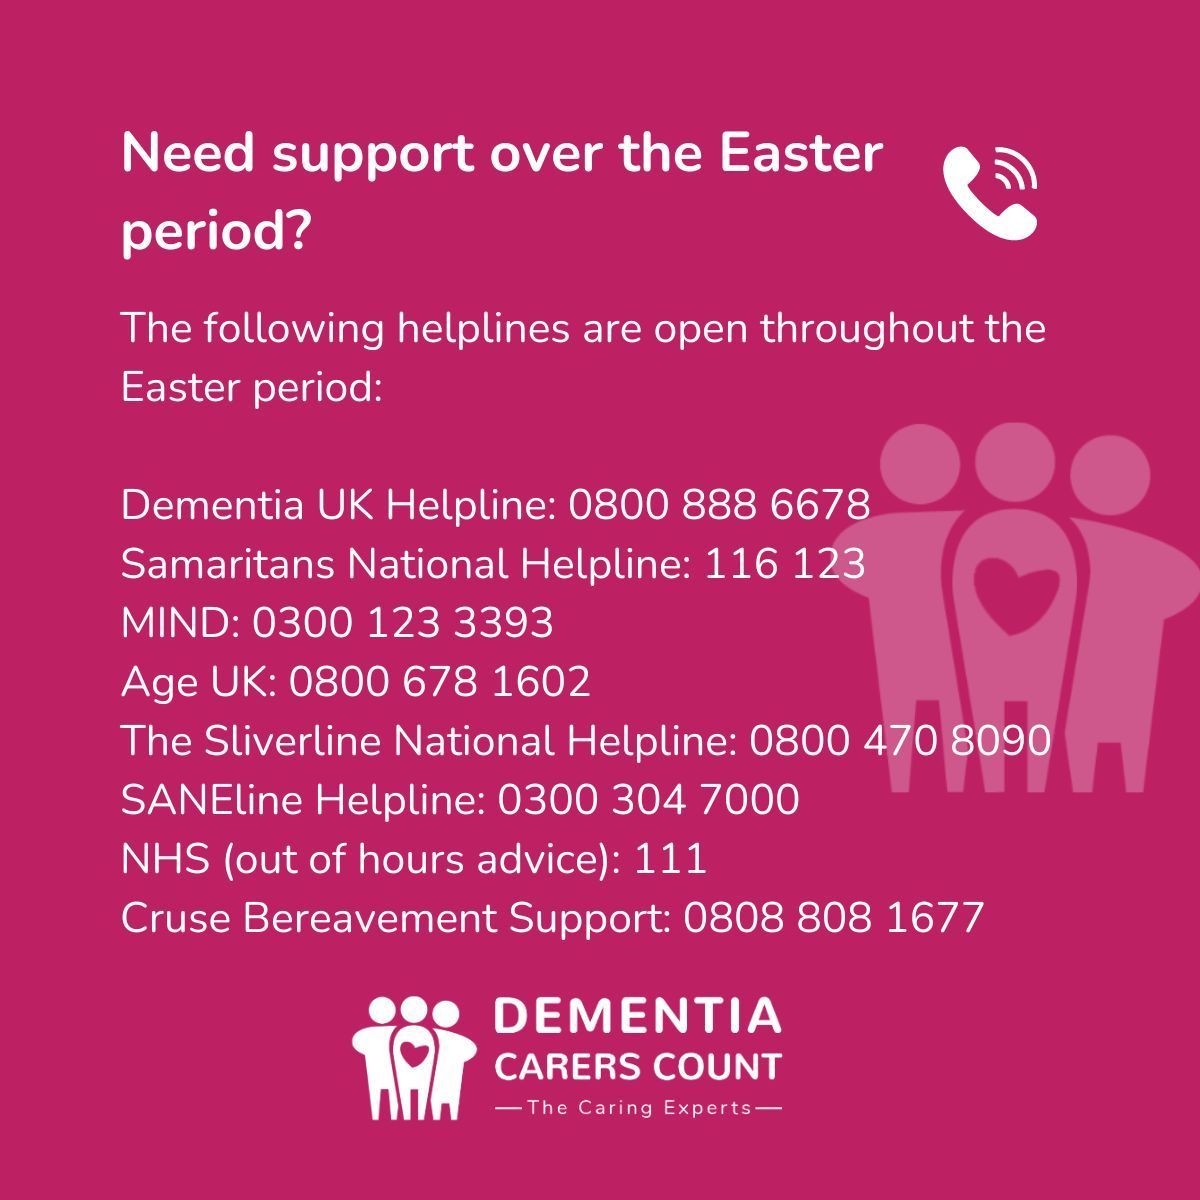 Our offices are closed over the Easter period, but if you need to talk, these services are open.